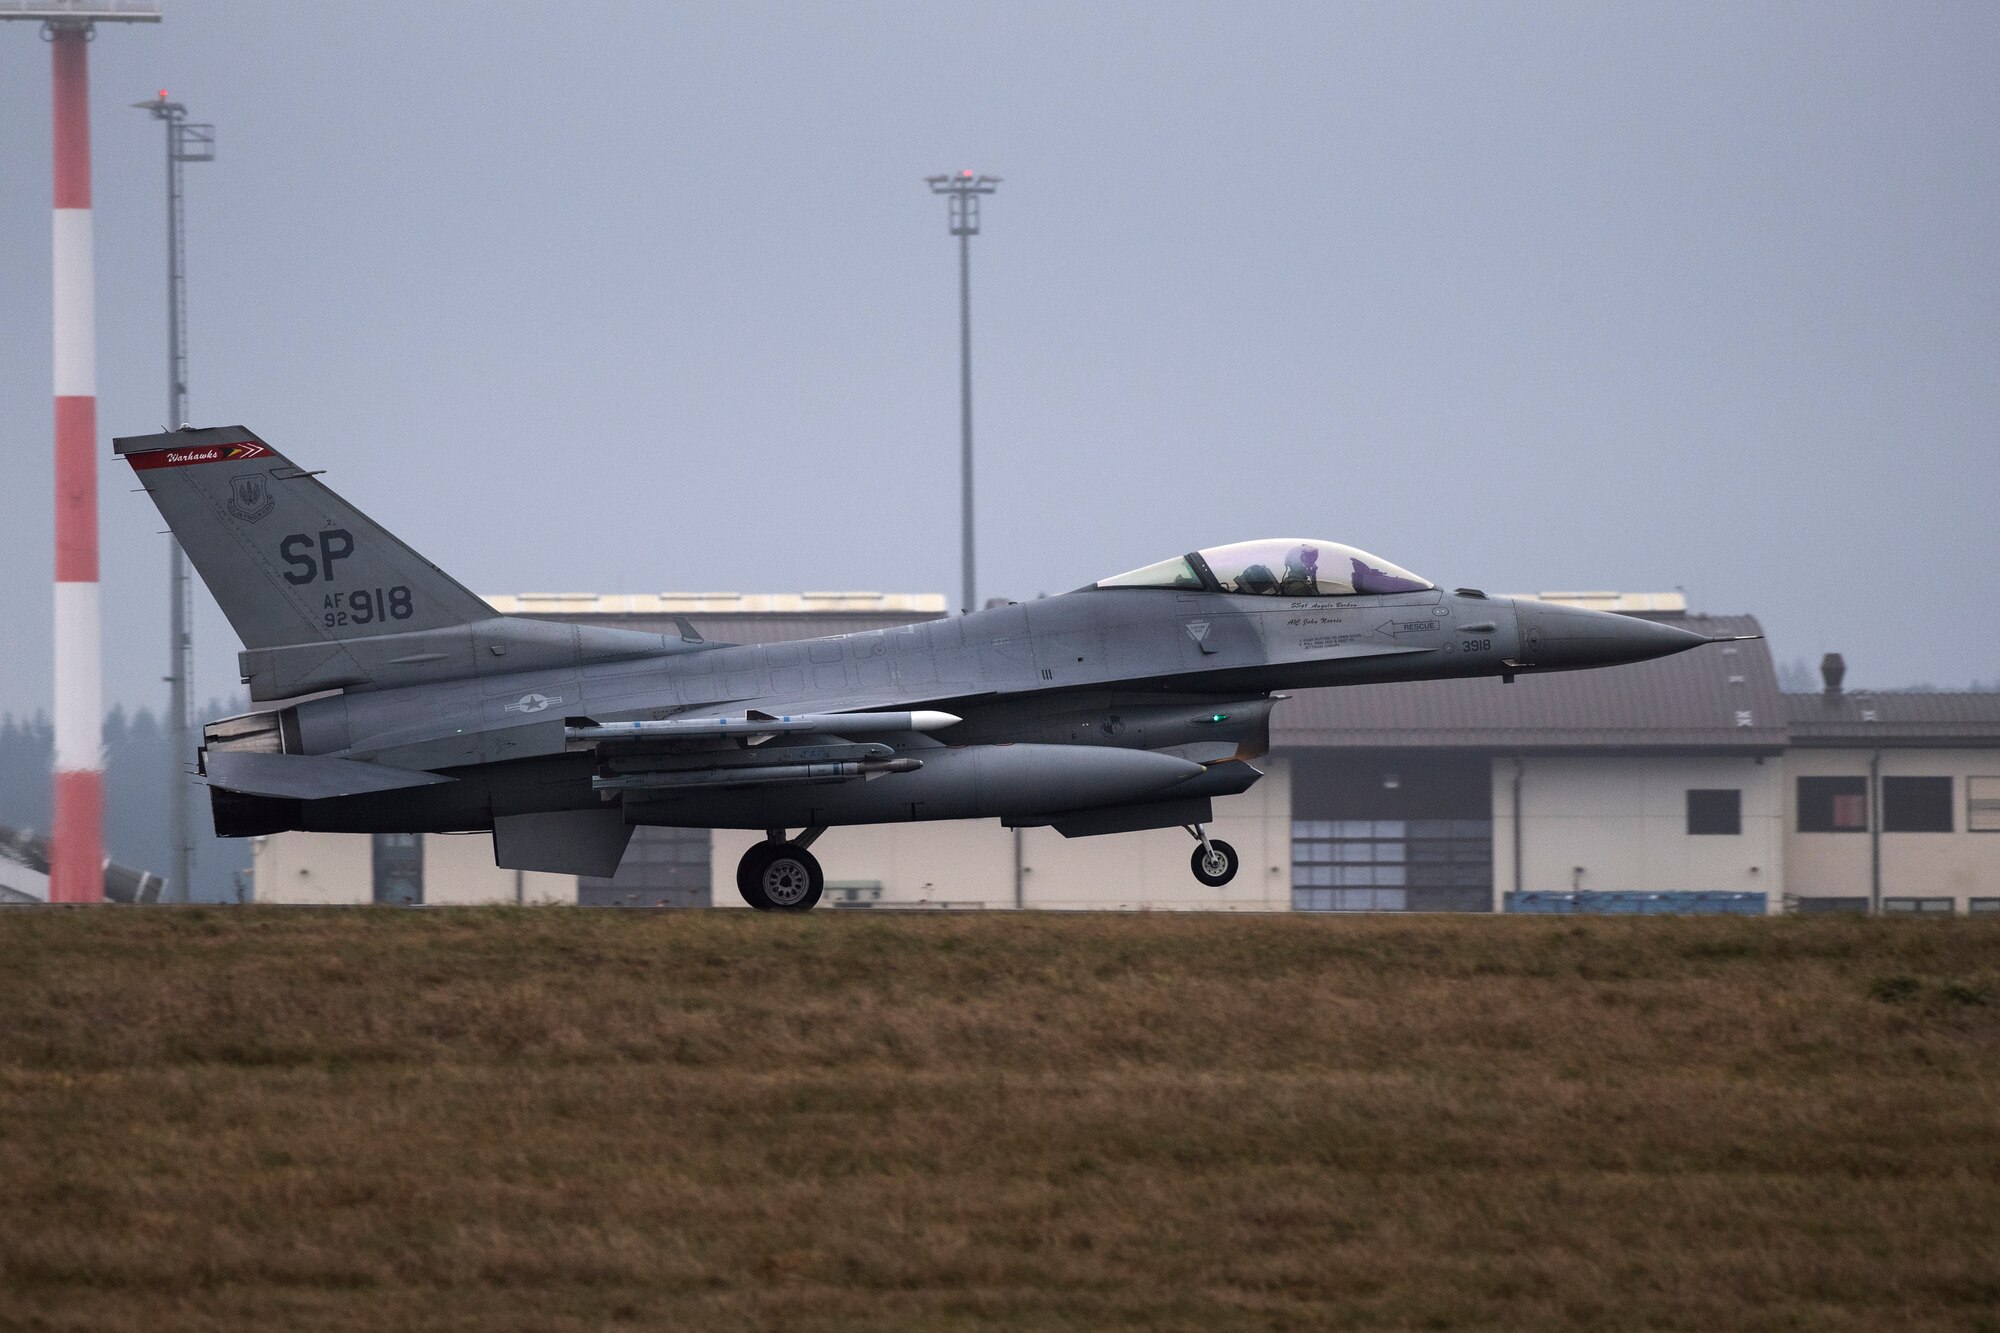 A U.S. Air Force F-16 Fighting Falcon, assigned to the 480th Fighter Squadron, lands at Spangdahlem Air Base, Germany, Dec. 10, 2019. Spangdahlem F-16s participated in an Allied Combat Lethality Exercise with the Polish air force to improve readiness and coordination with NATO partners in preparation for potential times of crisis. (U.S. Air Force photo by Airman 1st Class Valerie Seelye)